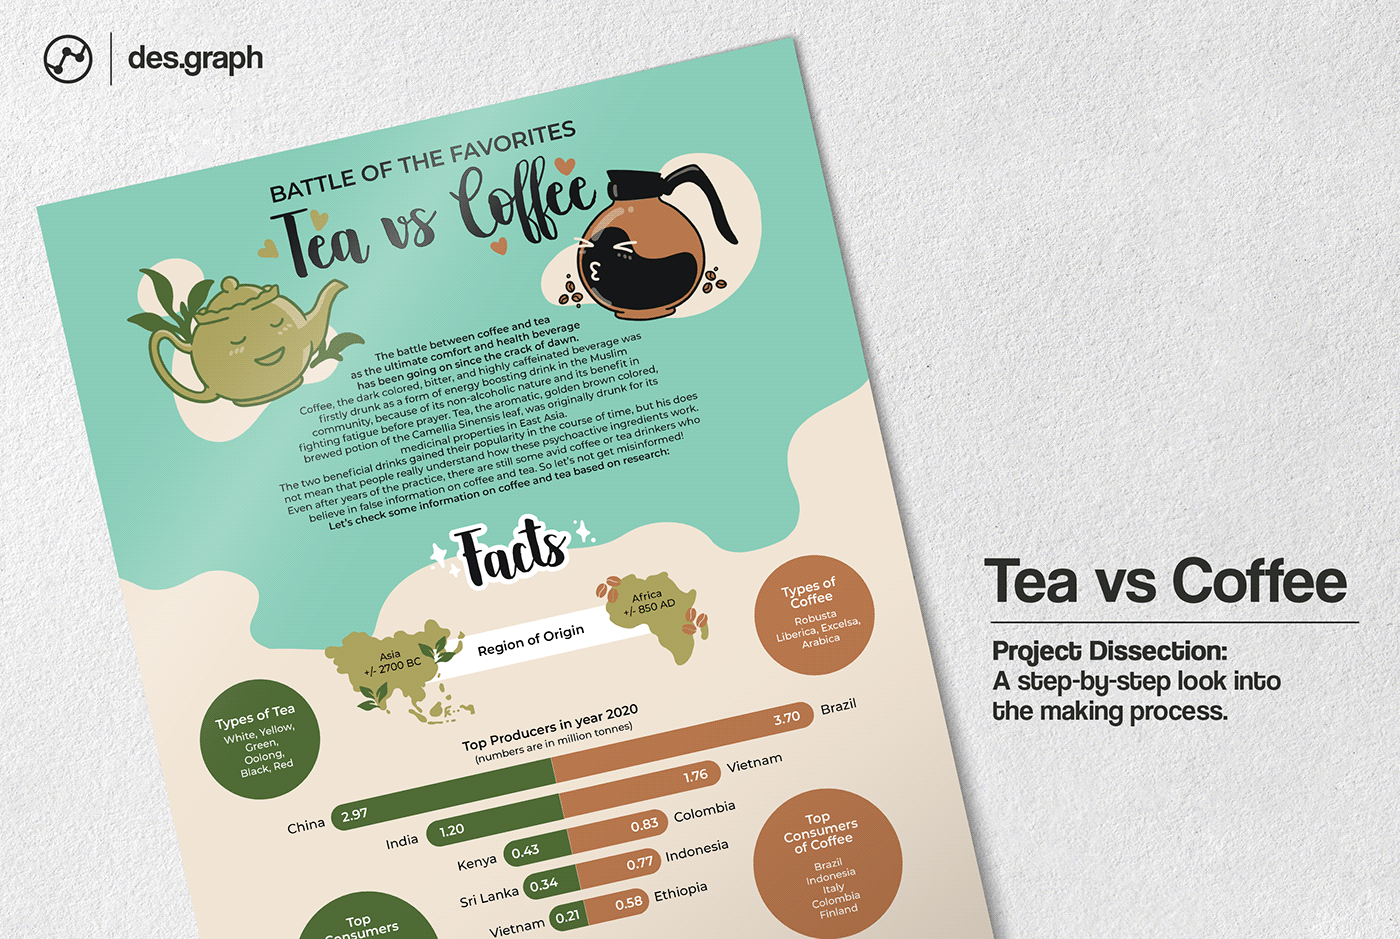 PROJECT DISSECTION:
Title Page
Tea VS Coffee